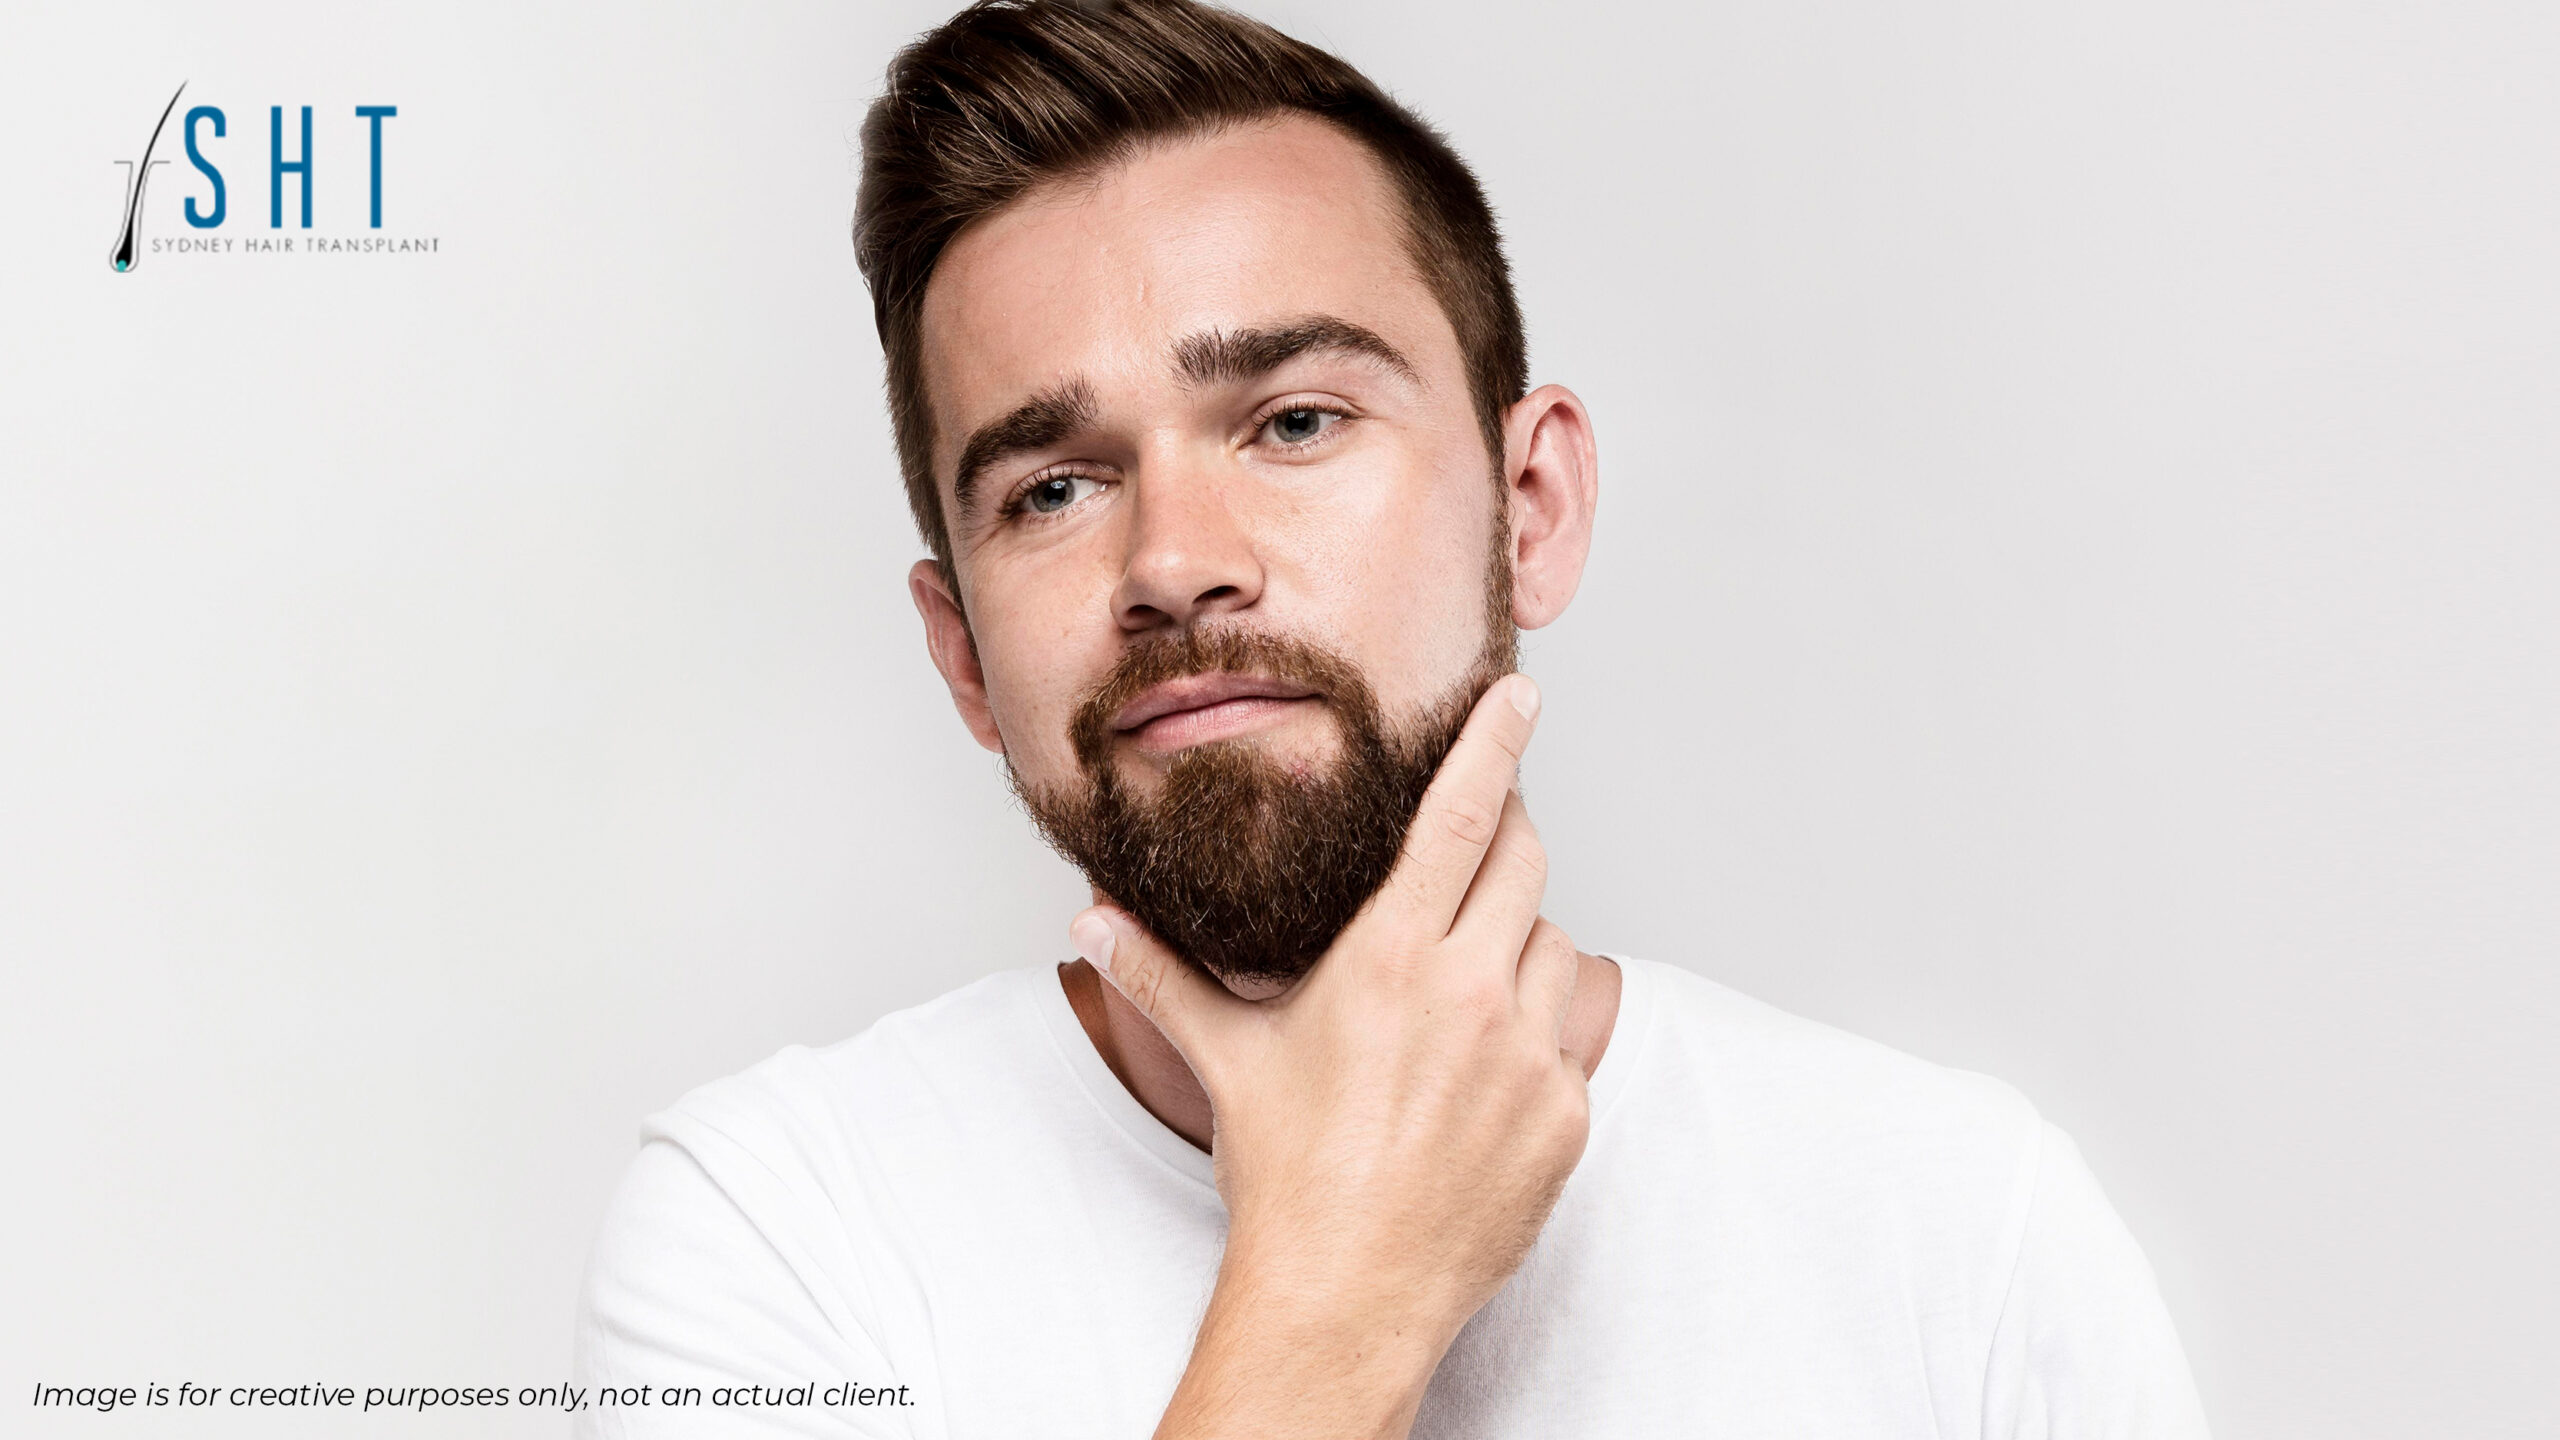 Everything You’ve Wanted to Know About Beard Hair Transplants